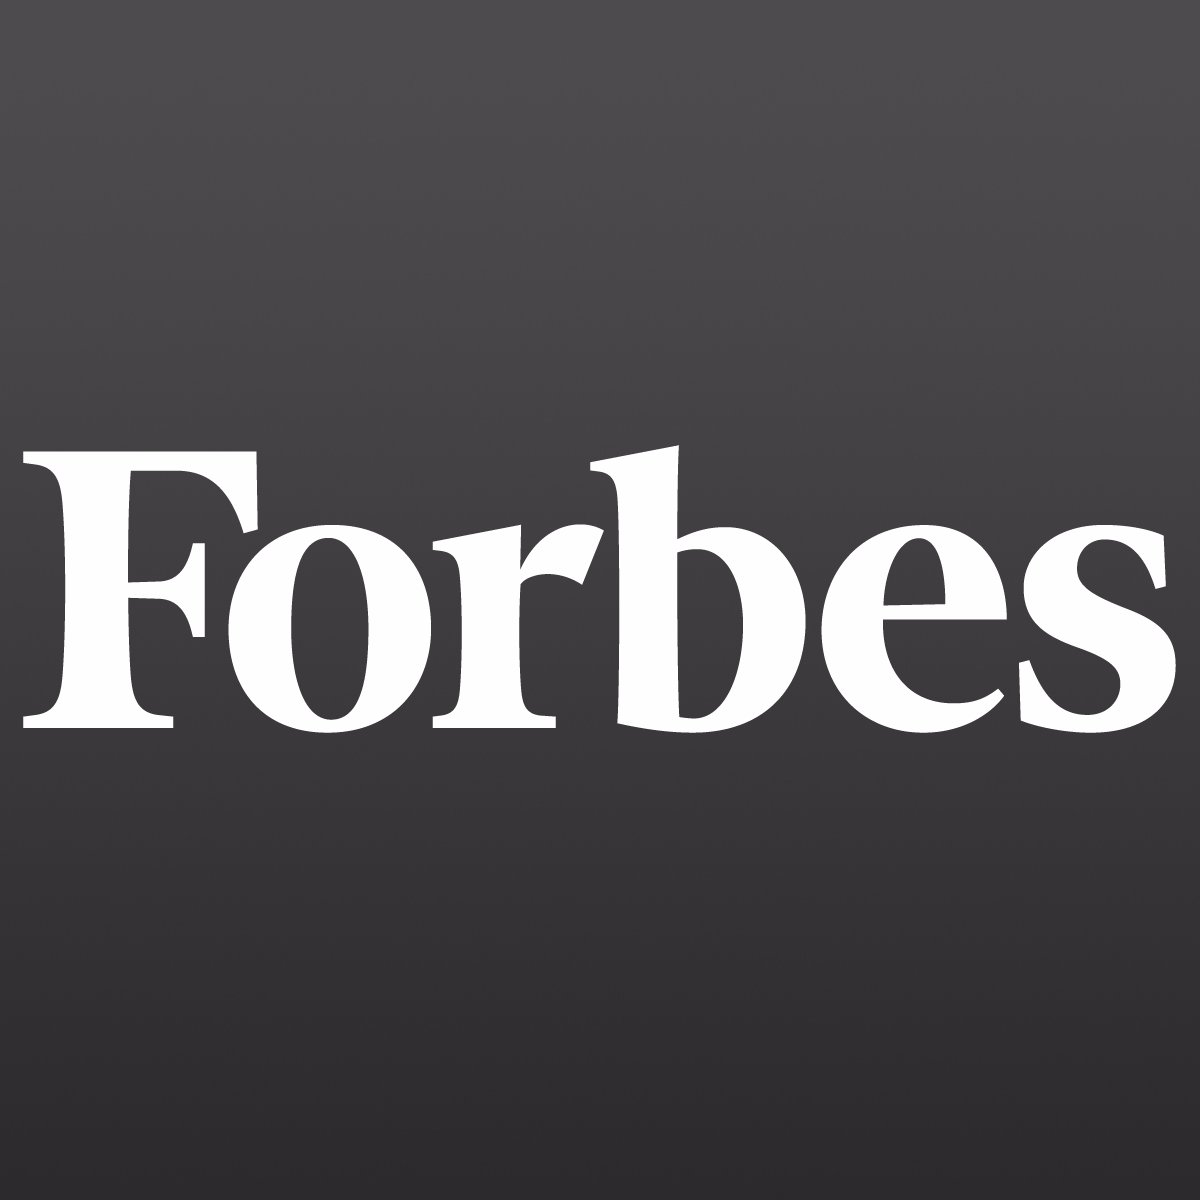 What Forbes Plans To Make Sure More Women Are Included In Coverage